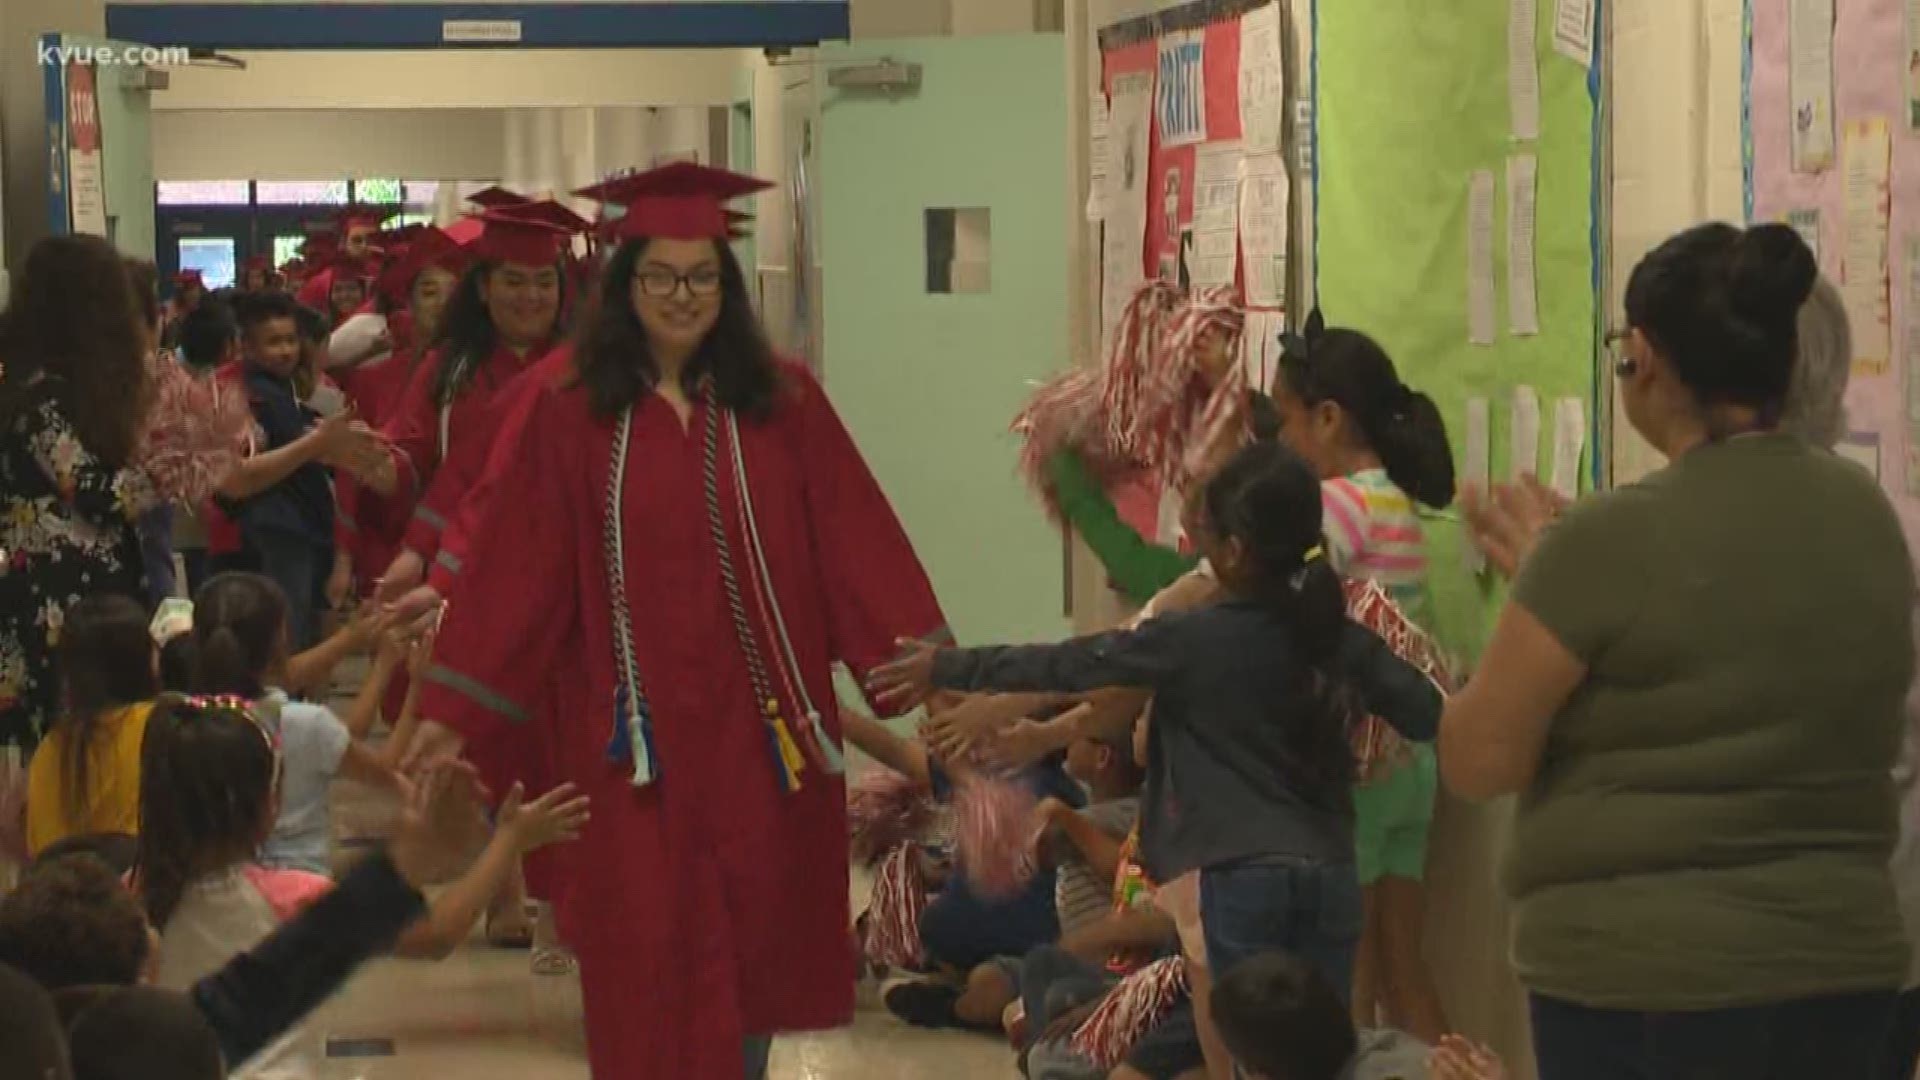 The high school seniors, who were dressed up in their caps and gowns, said they 'hope to inspire other kids to graduate.'